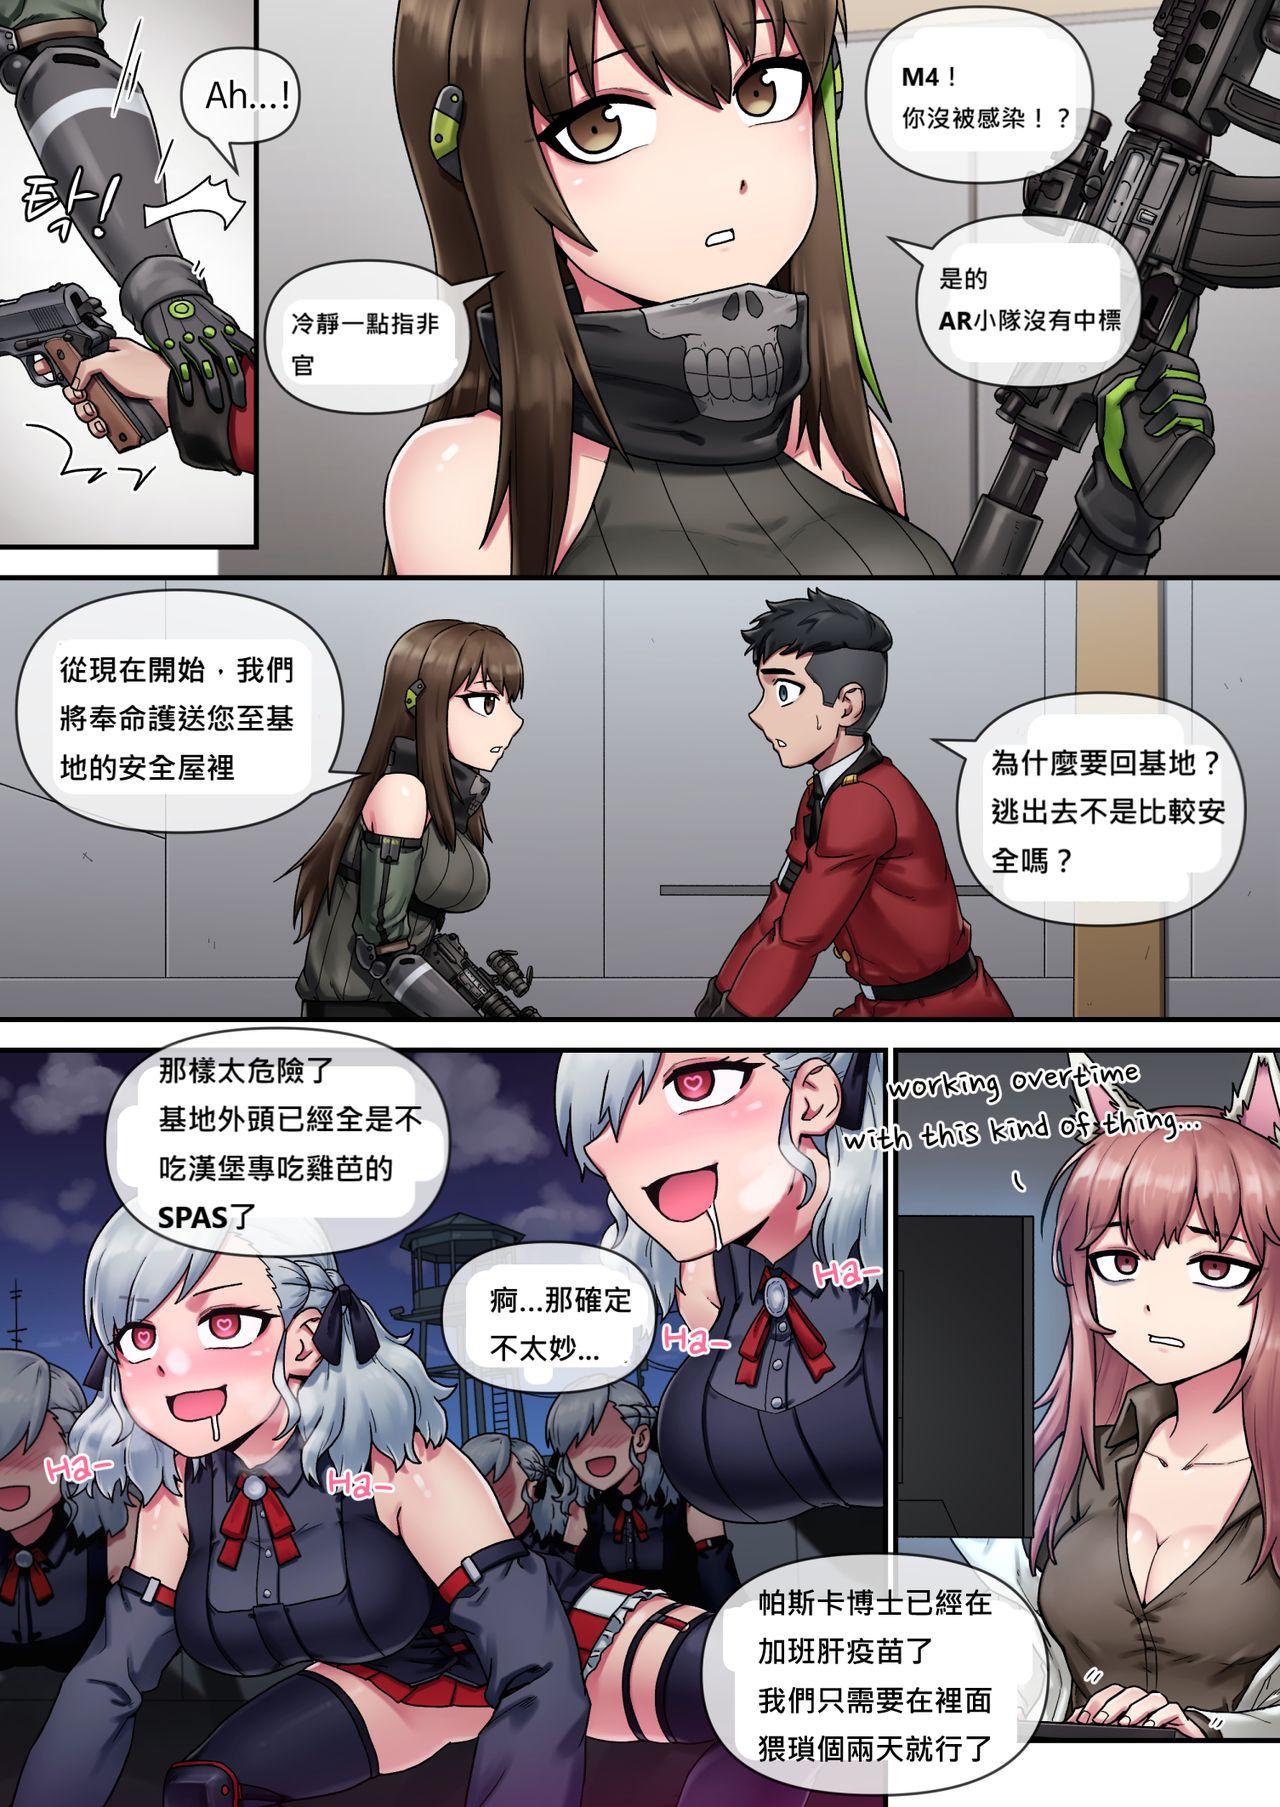 Prostitute My Only Princess - Girls frontline Short - Page 4